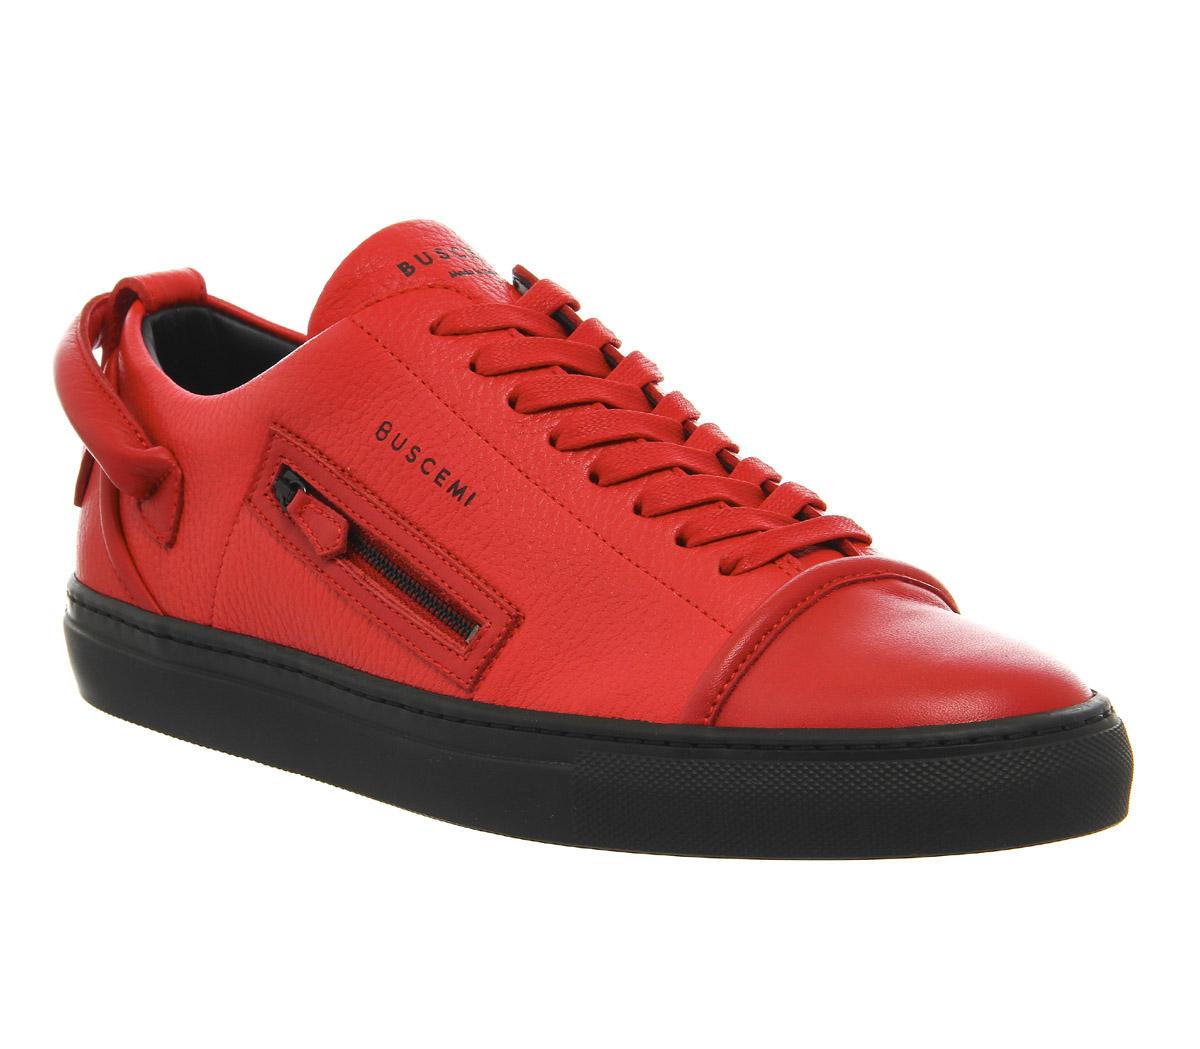 Buscemi 50mm LowRed Leather Black Sole